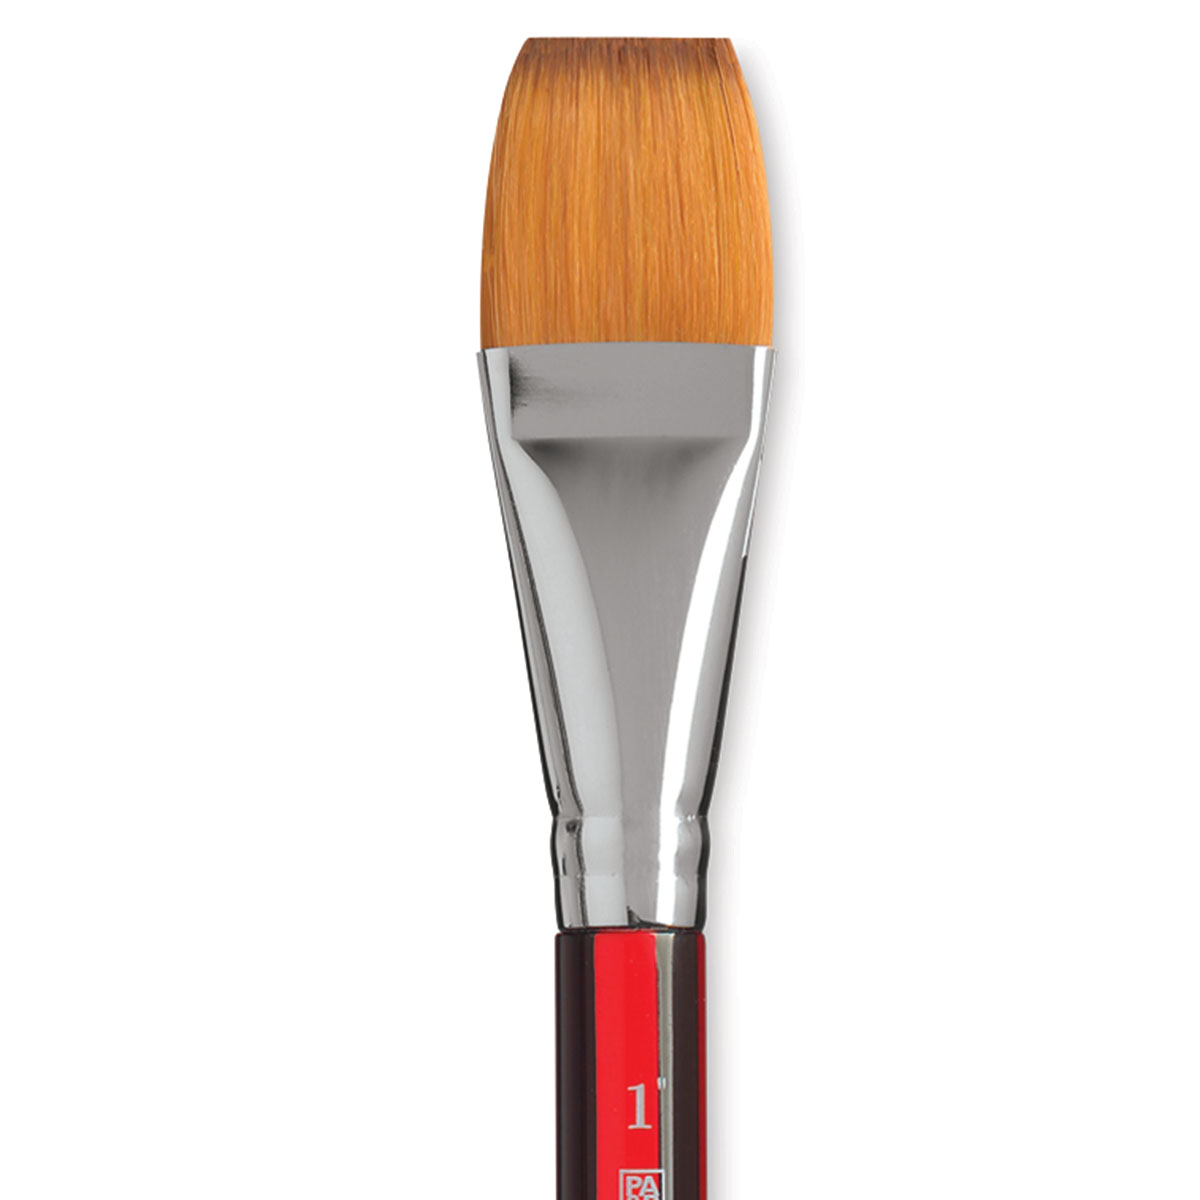 Princeton Velvetouch Series 3950 Synthetic Brushes - Blick Exclusive, Short  Handle, Set of 4 